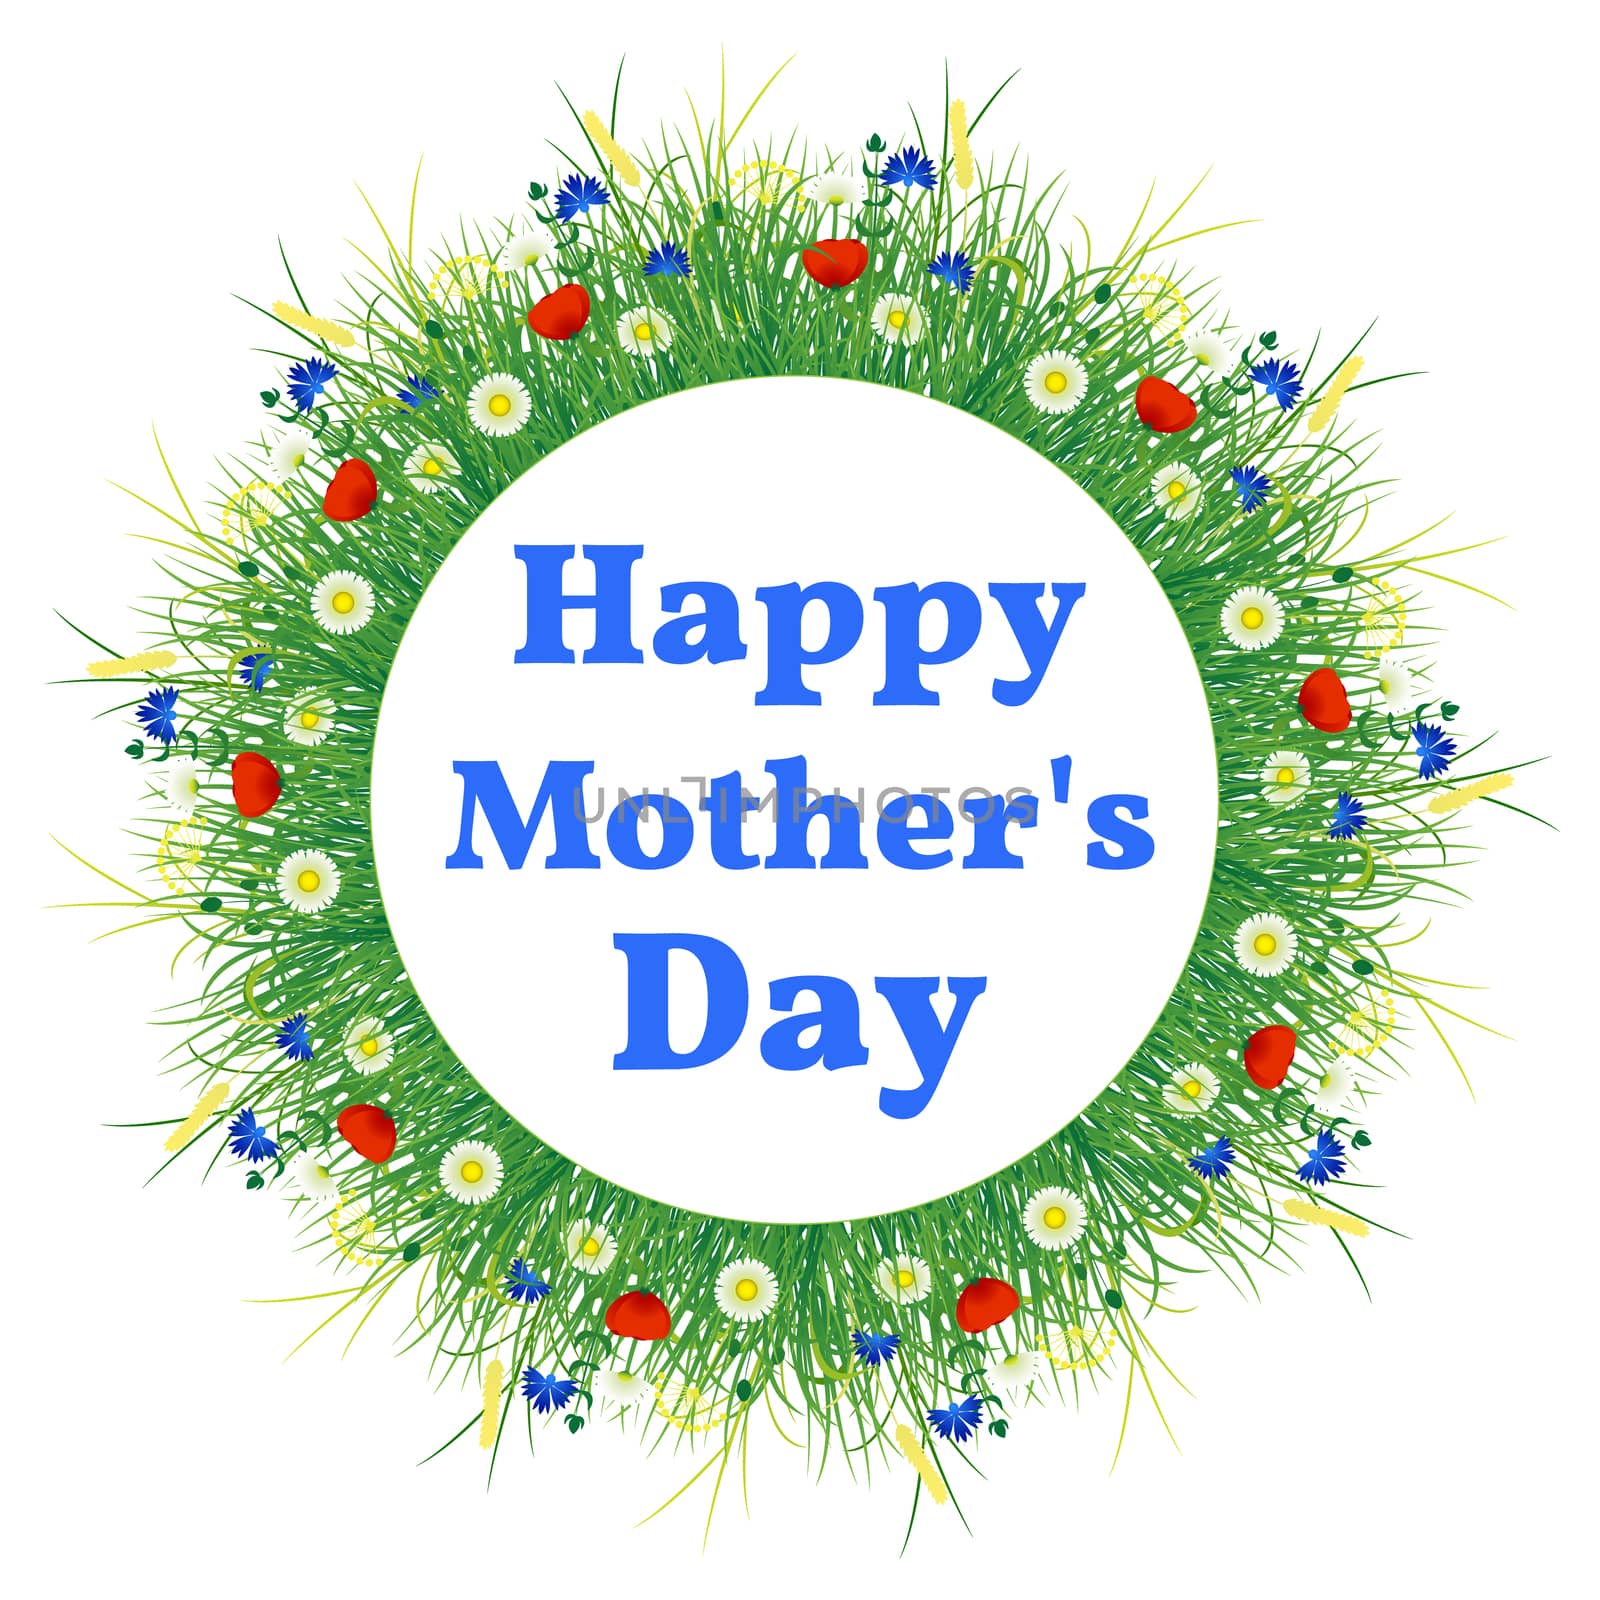 Happy Mothers Day. Name of the holiday. Background of a wreath of meadow flowers